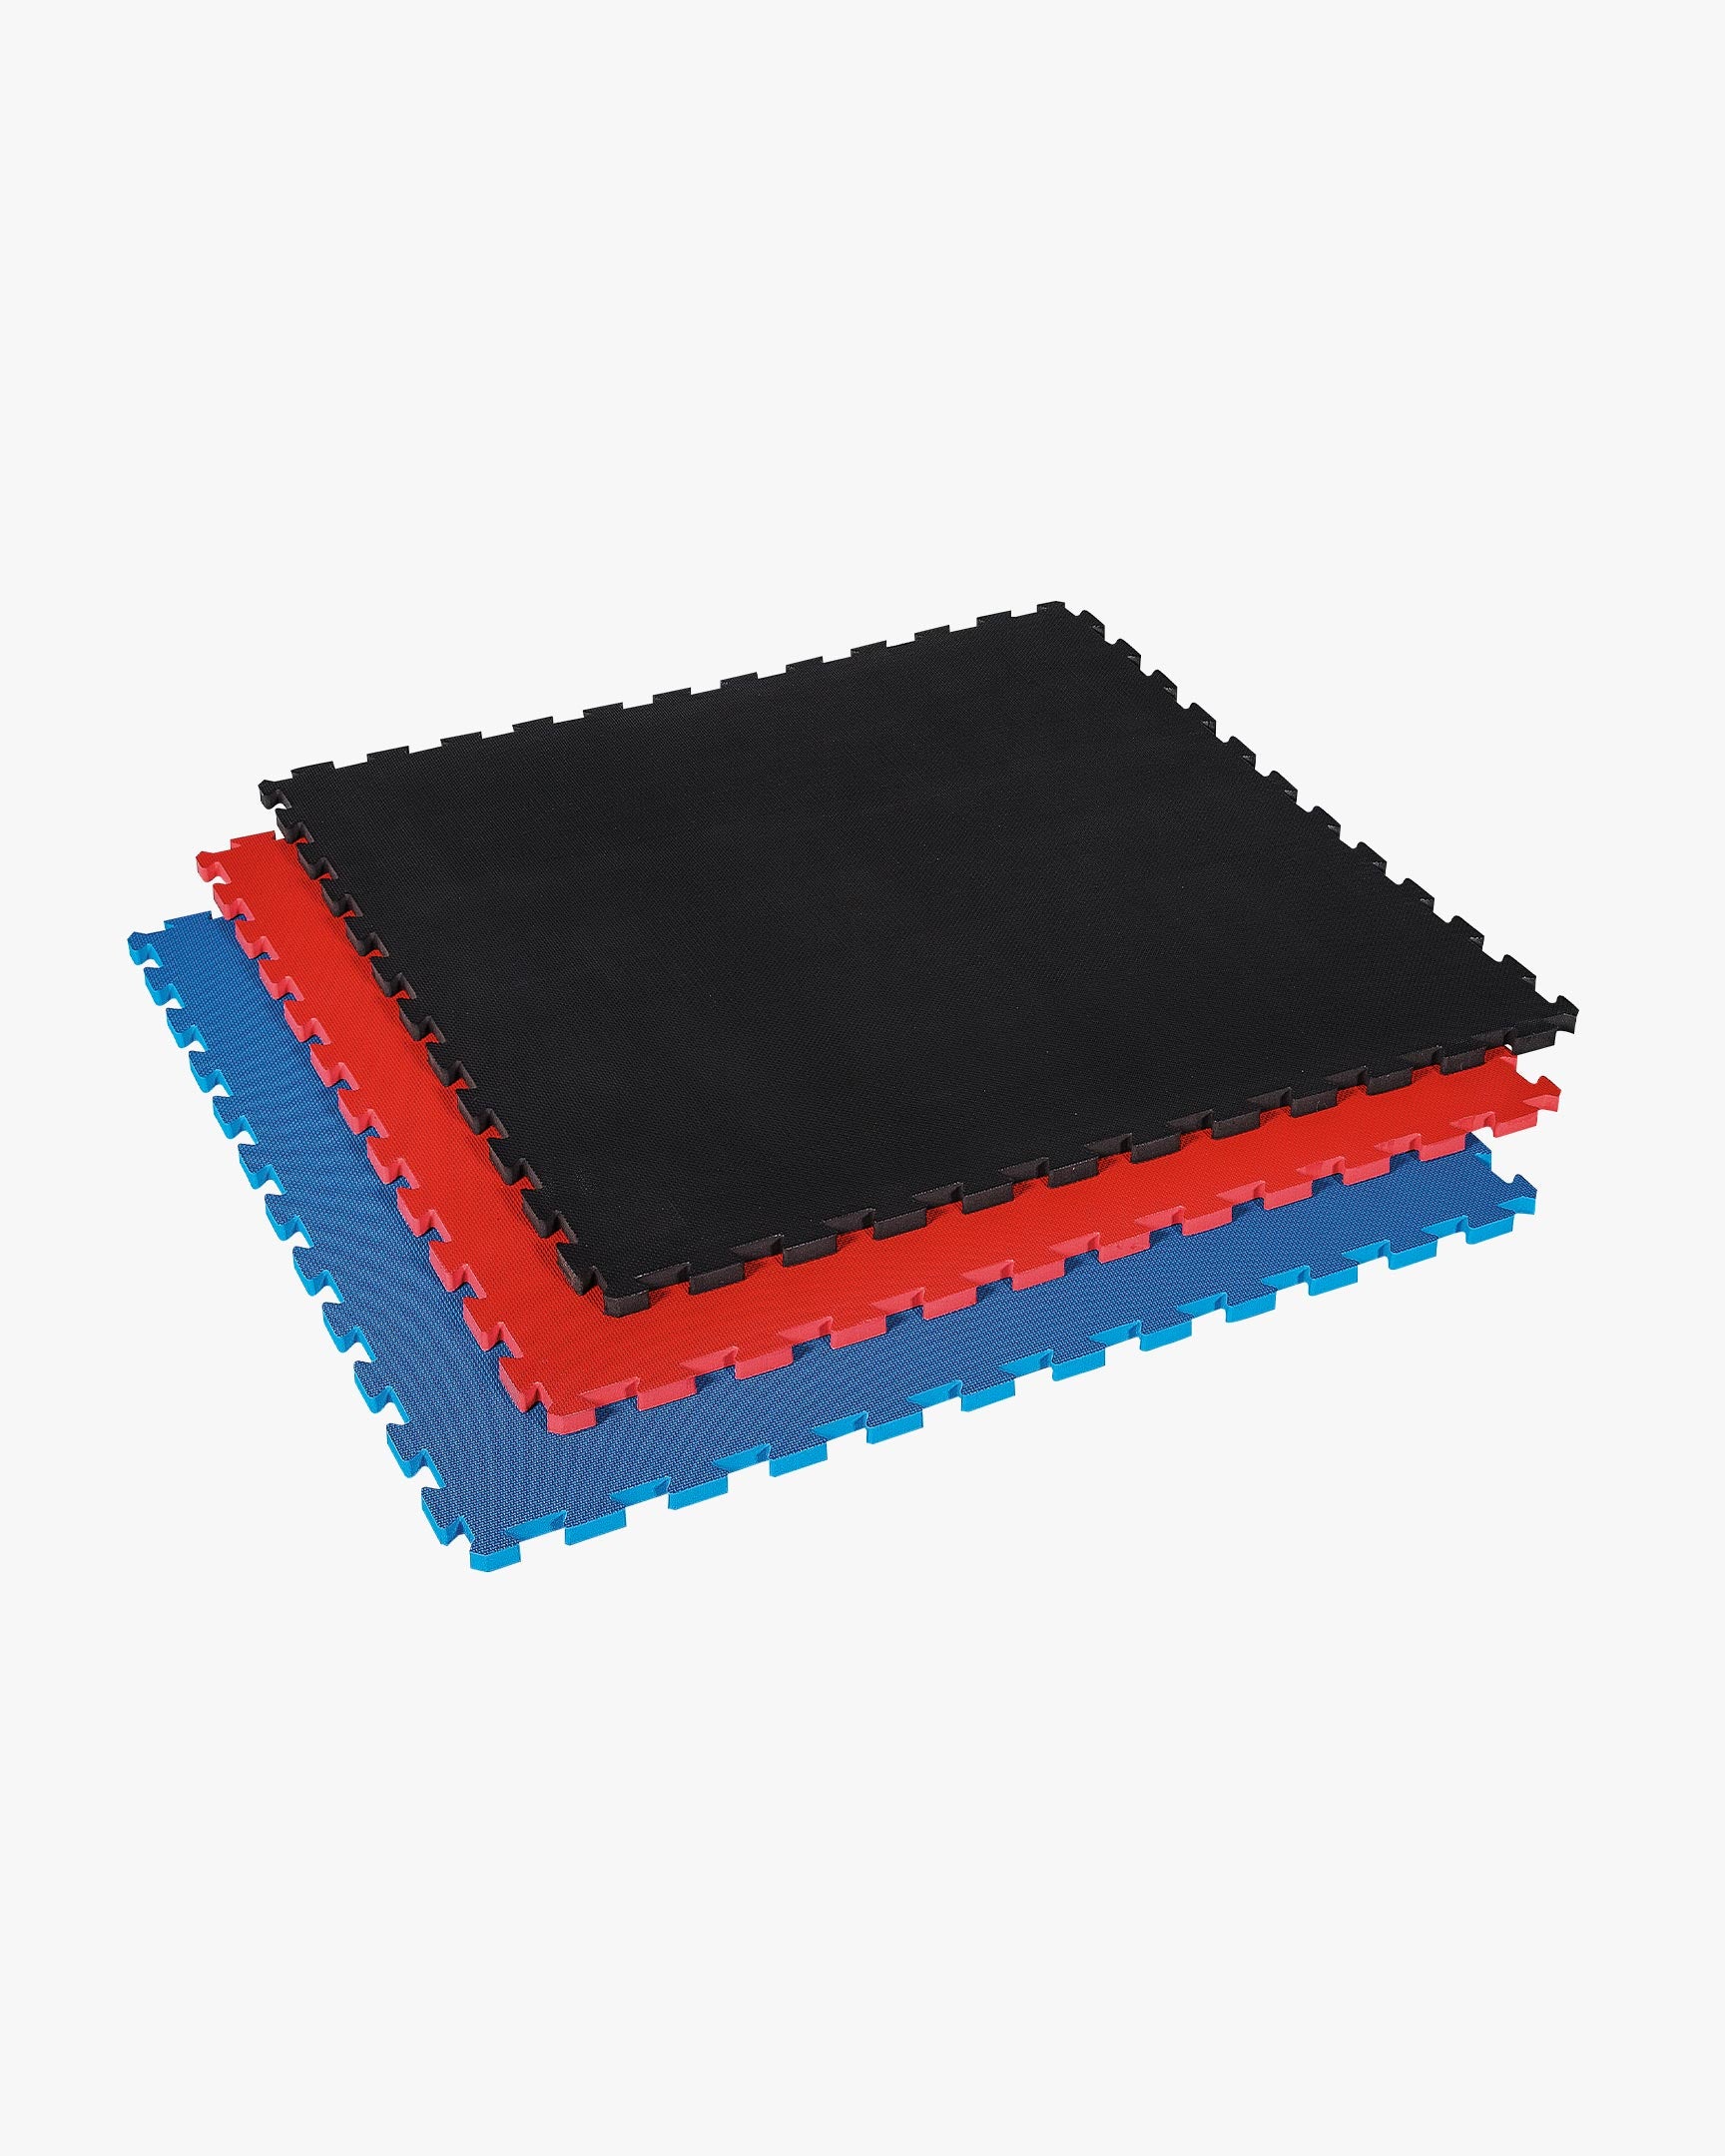 3/4" Thick Puzzle Sport Mat